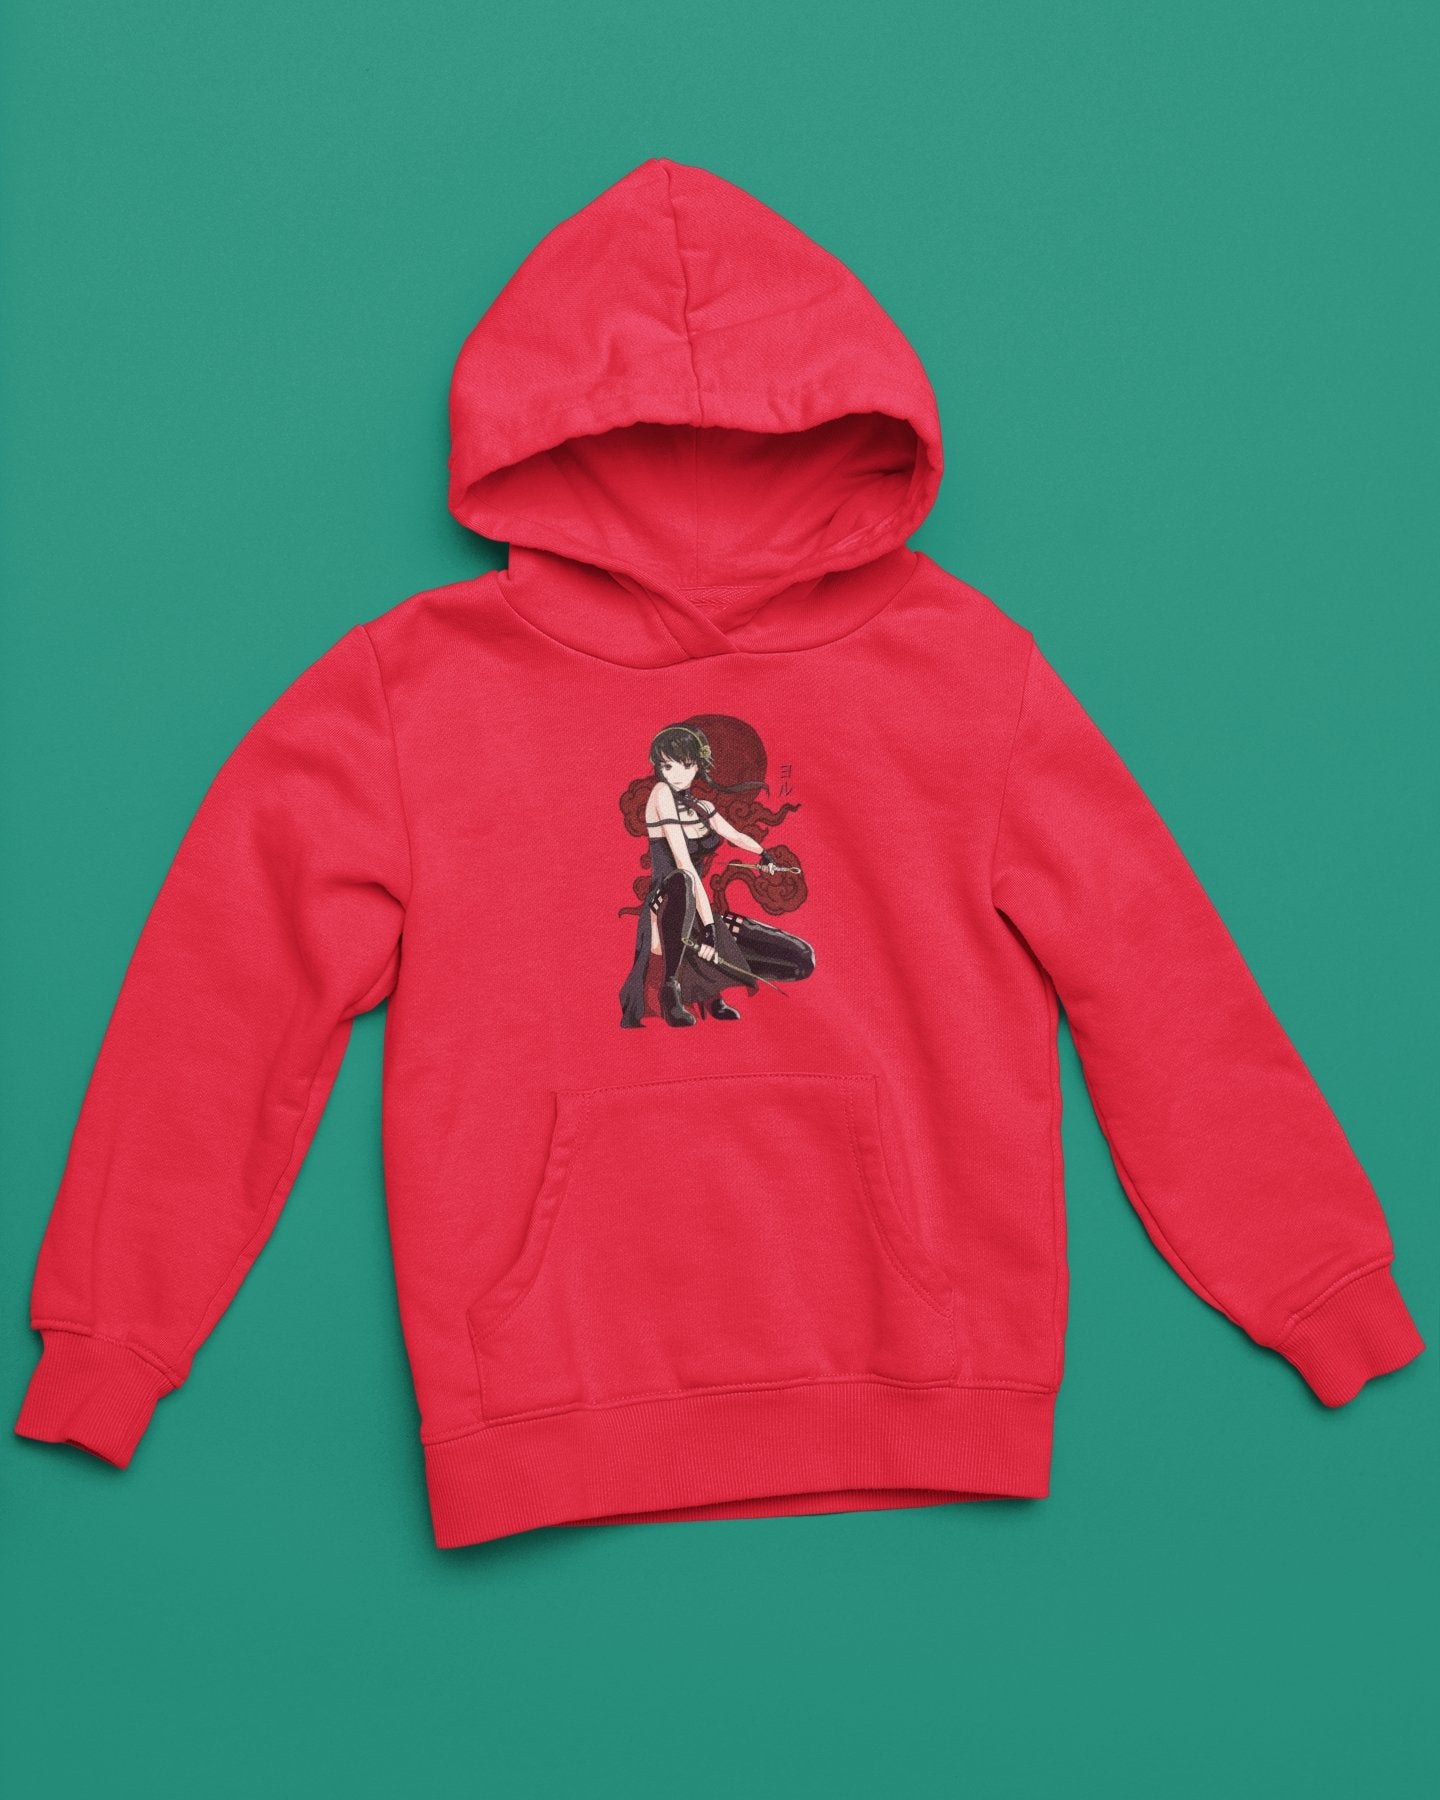 Yor Forger Spy x Family Anime Hoodie - One Punch Fits